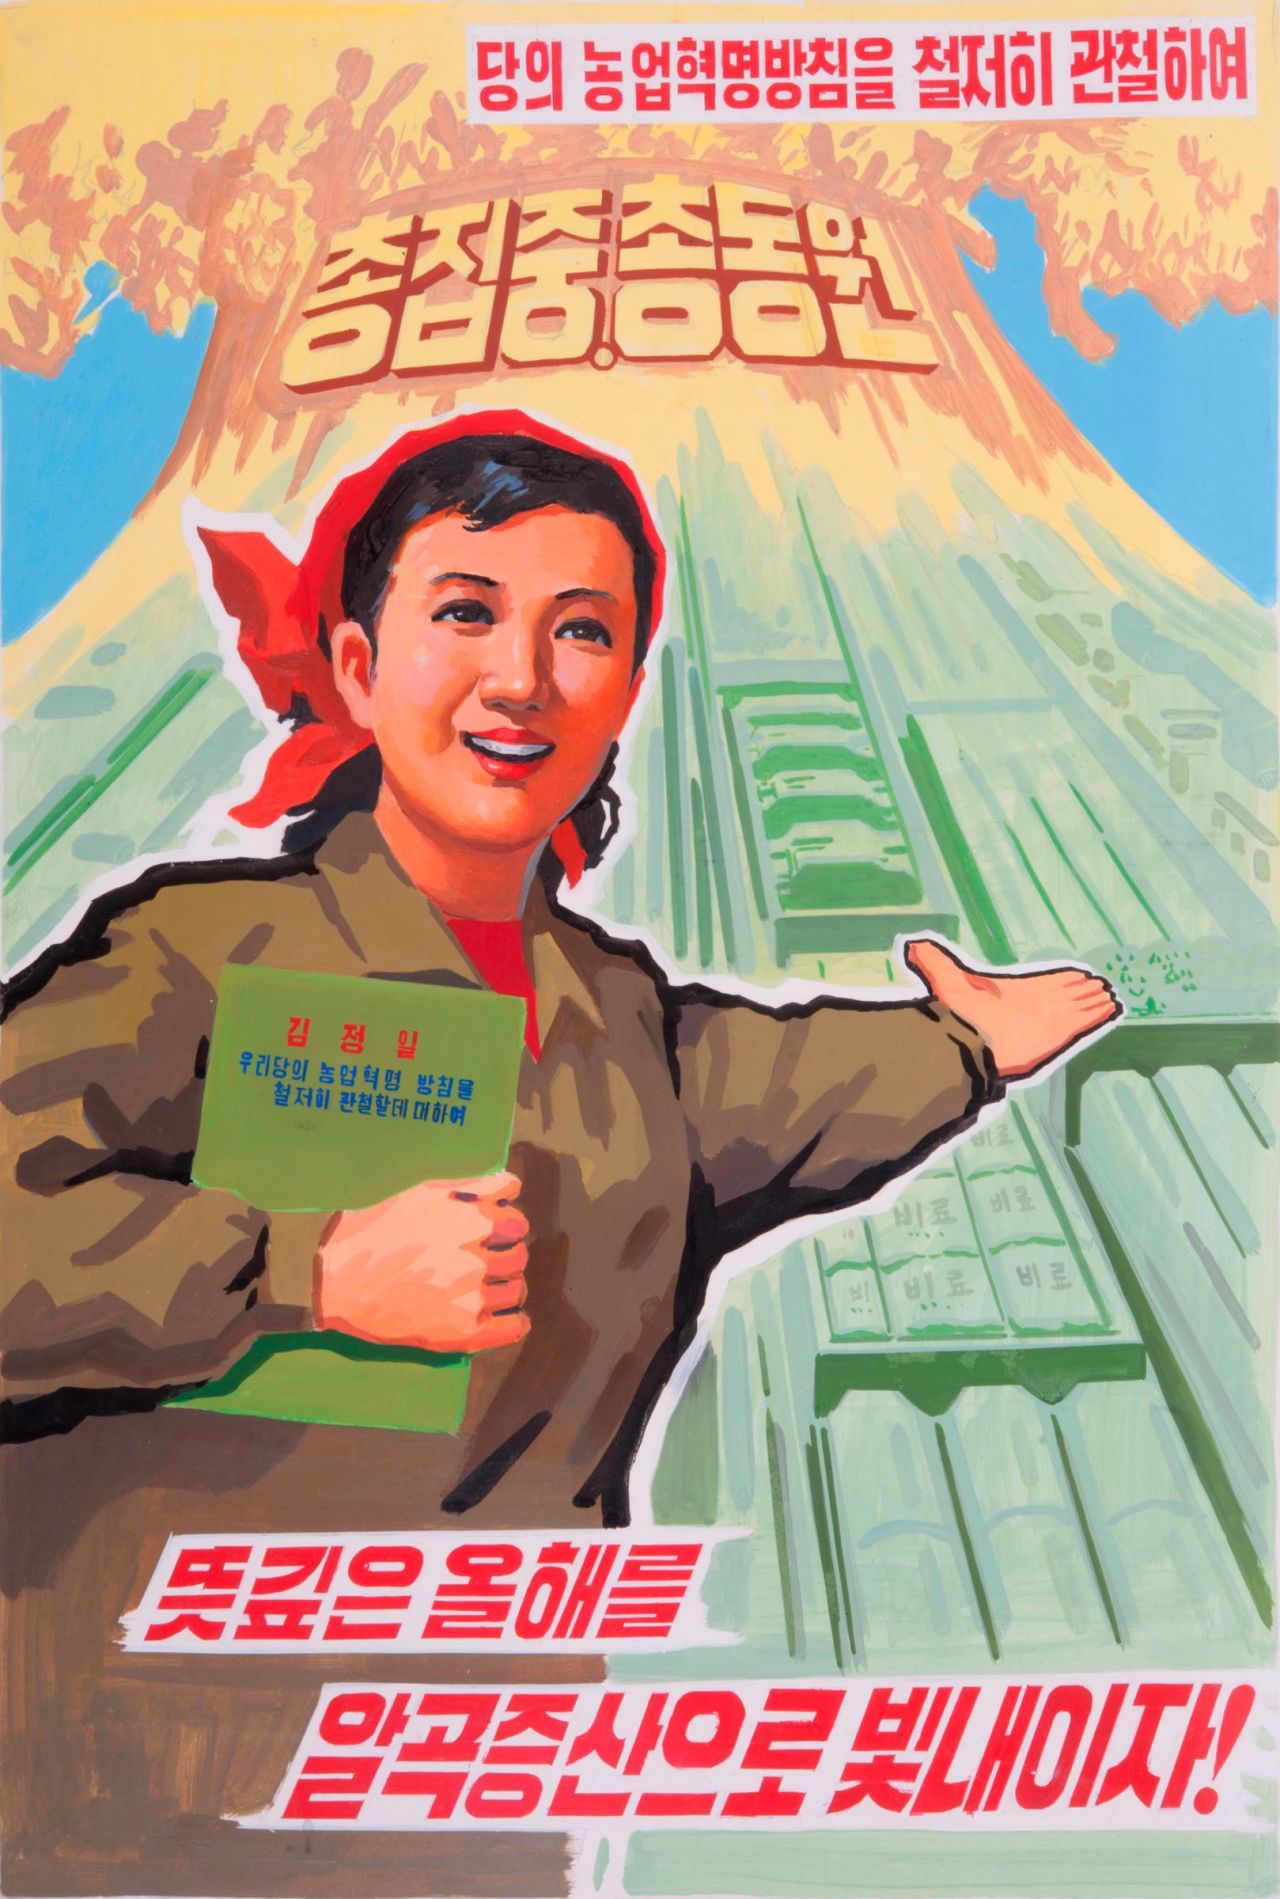 Stanford fellow Katharina Zellweger -- who lived in Pyongyang while working for a Swiss government agency -- has collected over 100 posters from North Korea. Most of them promote new agricultural practices and policy.